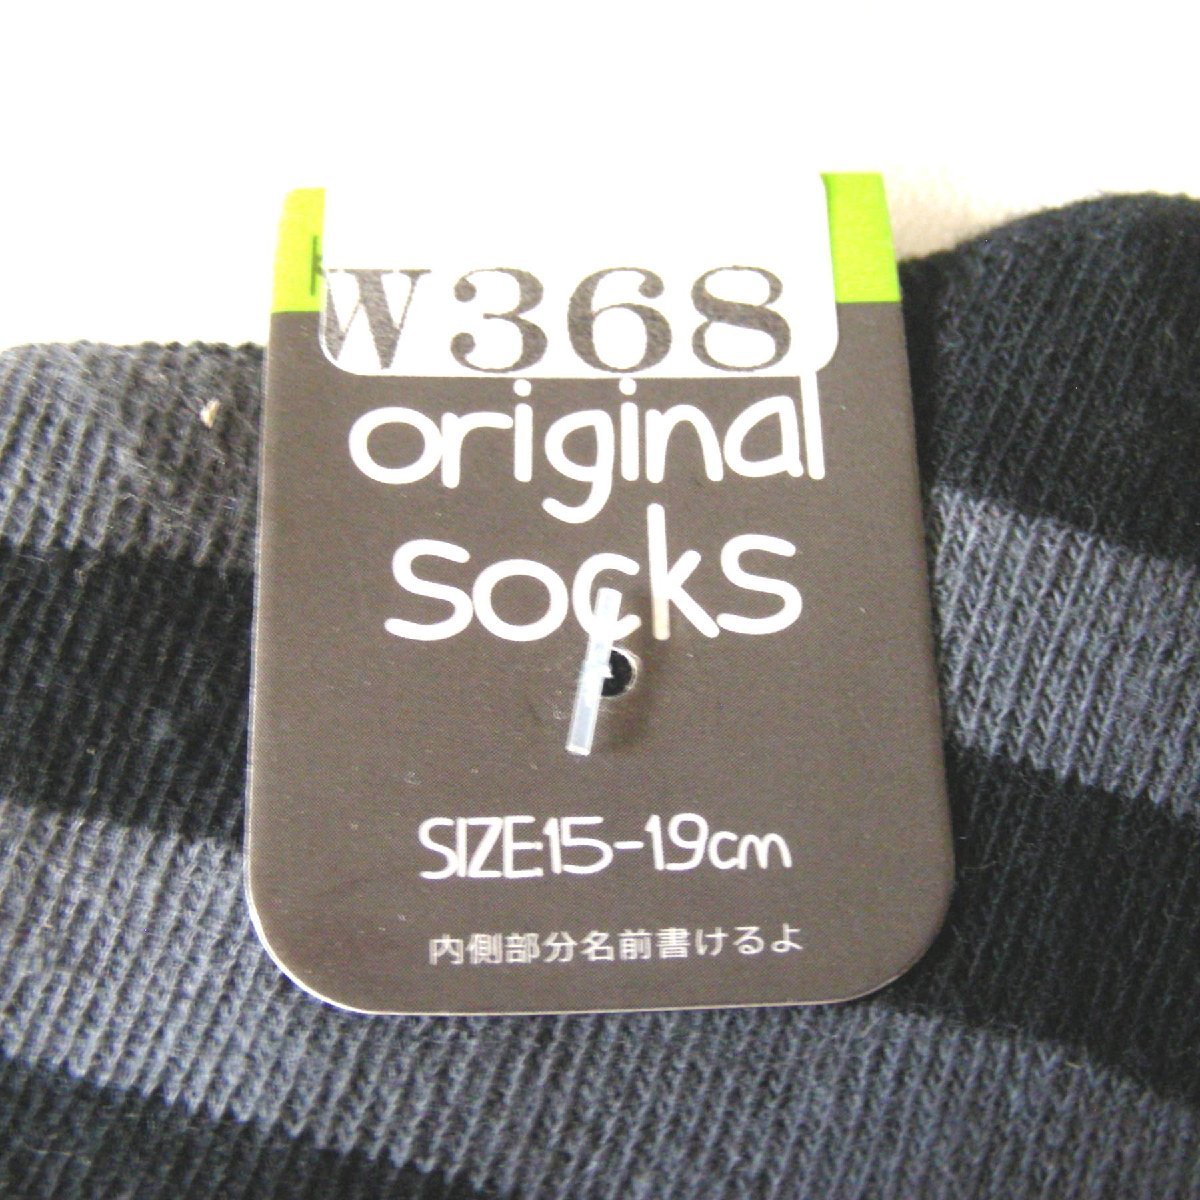 * unopened * unused * Kids socks * size 15~19cm* slipping cease attaching * child & baby * miscellaneous goods *W368